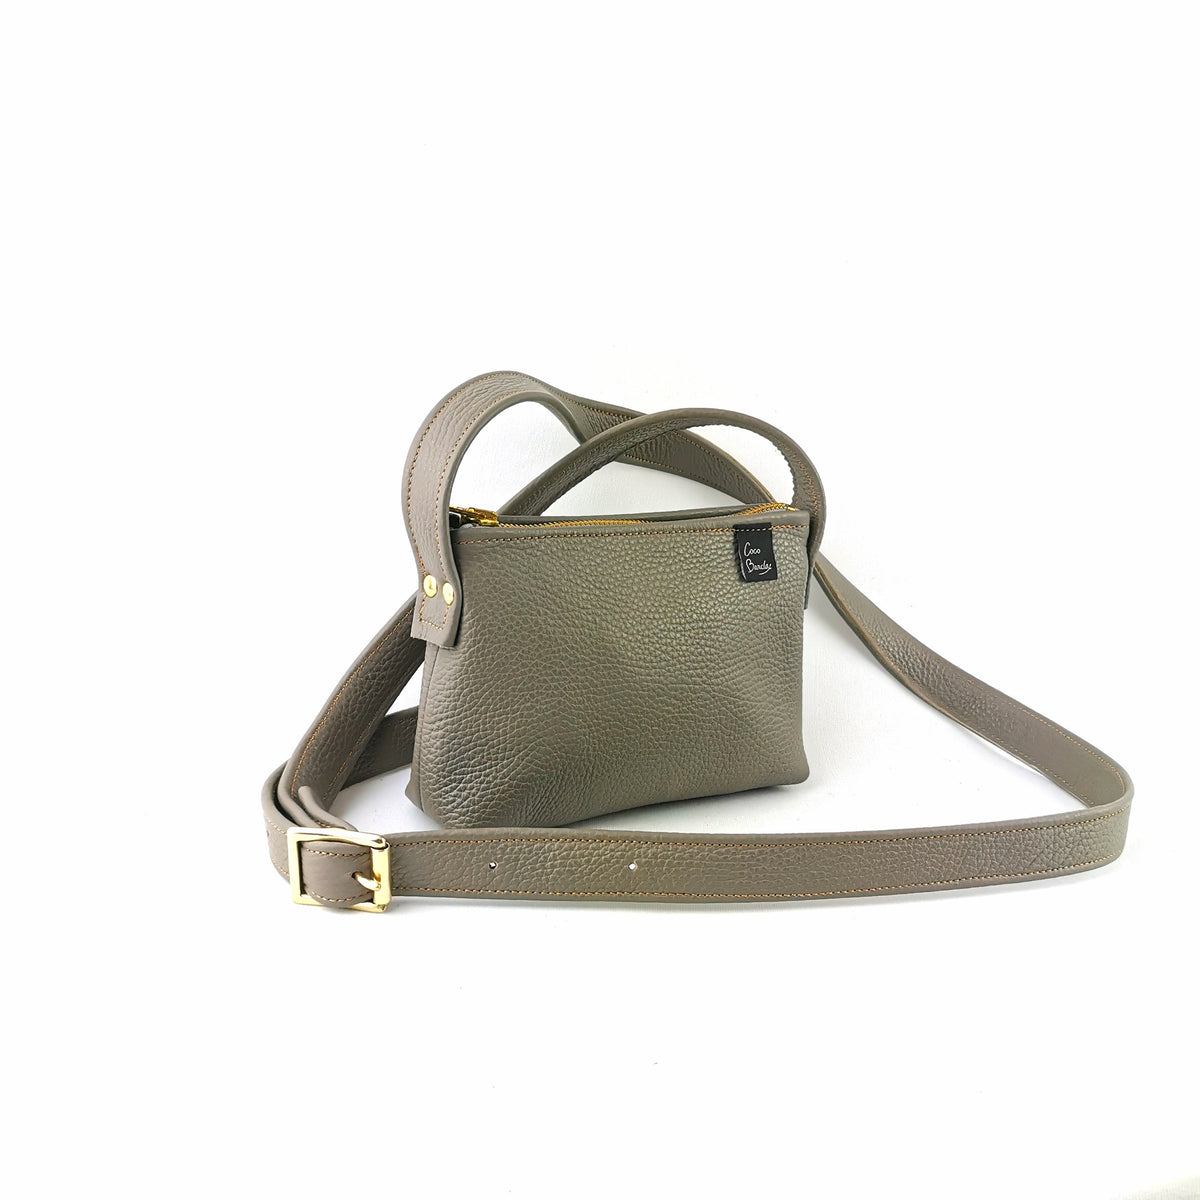 Hybrid bag in taupe